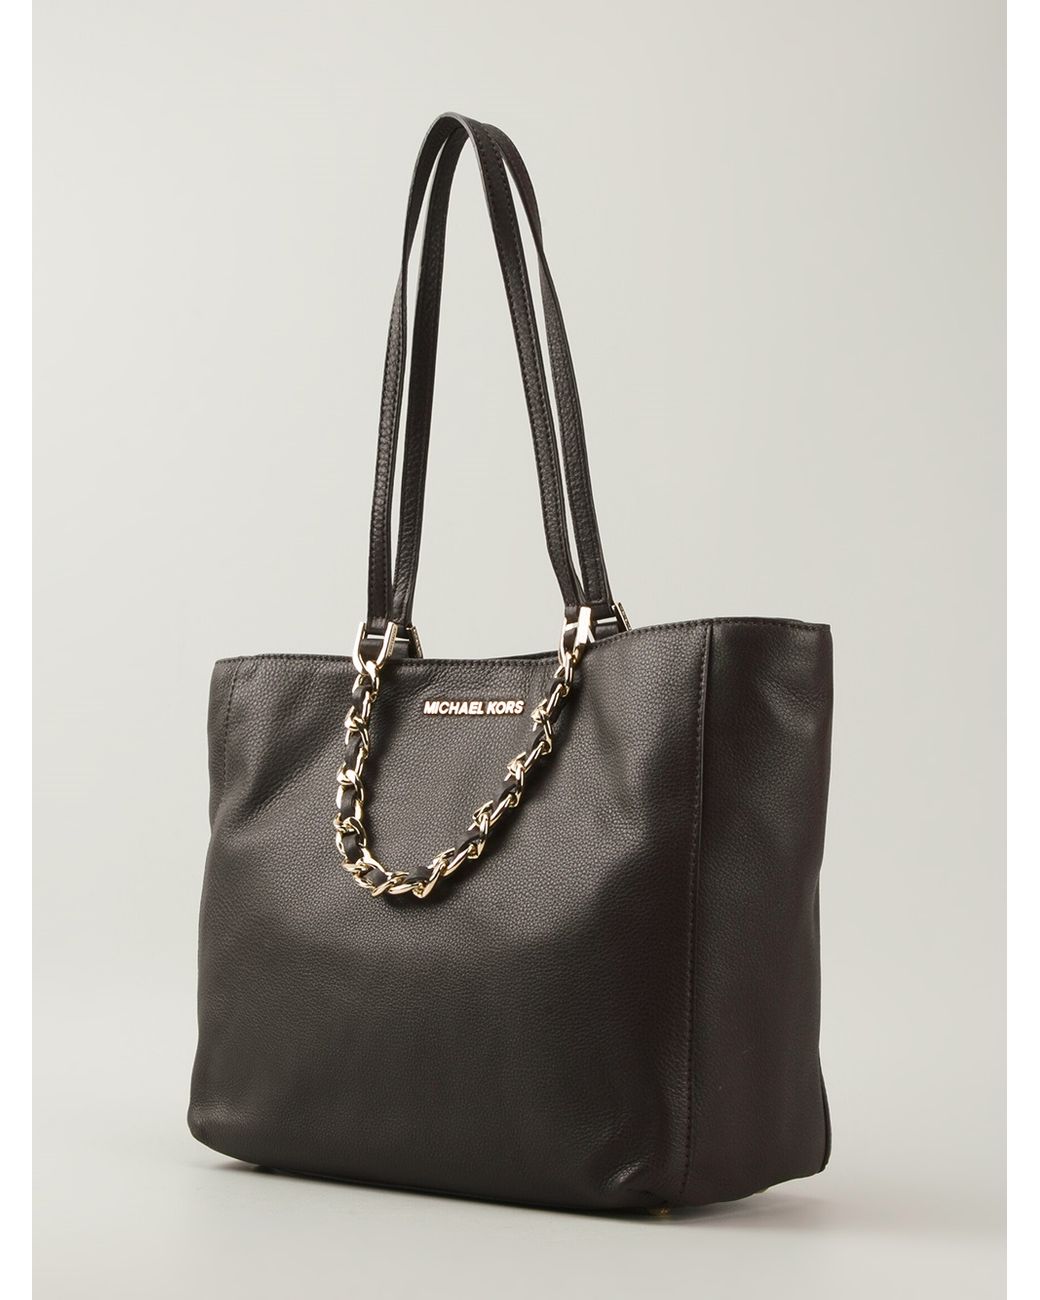 MICHAEL Michael Kors Chain Strap Tote in Brown | Lyst